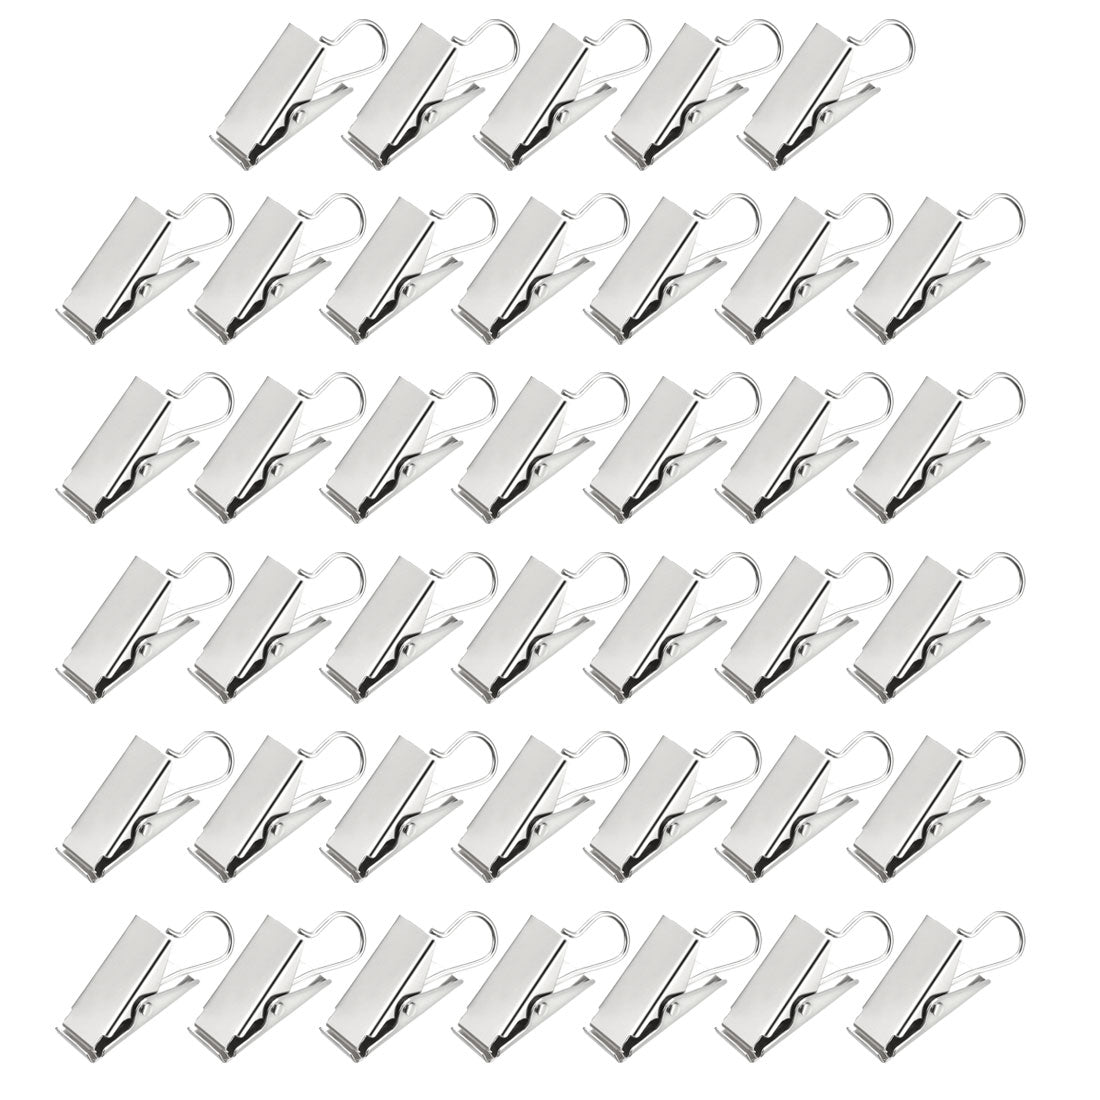 Uxcell Uxcell Curtain Clip Hook Set Clips for Curtain Photos Home Decoration Art Craft Display 1.02"*0.47" Silver Tone 40pcs